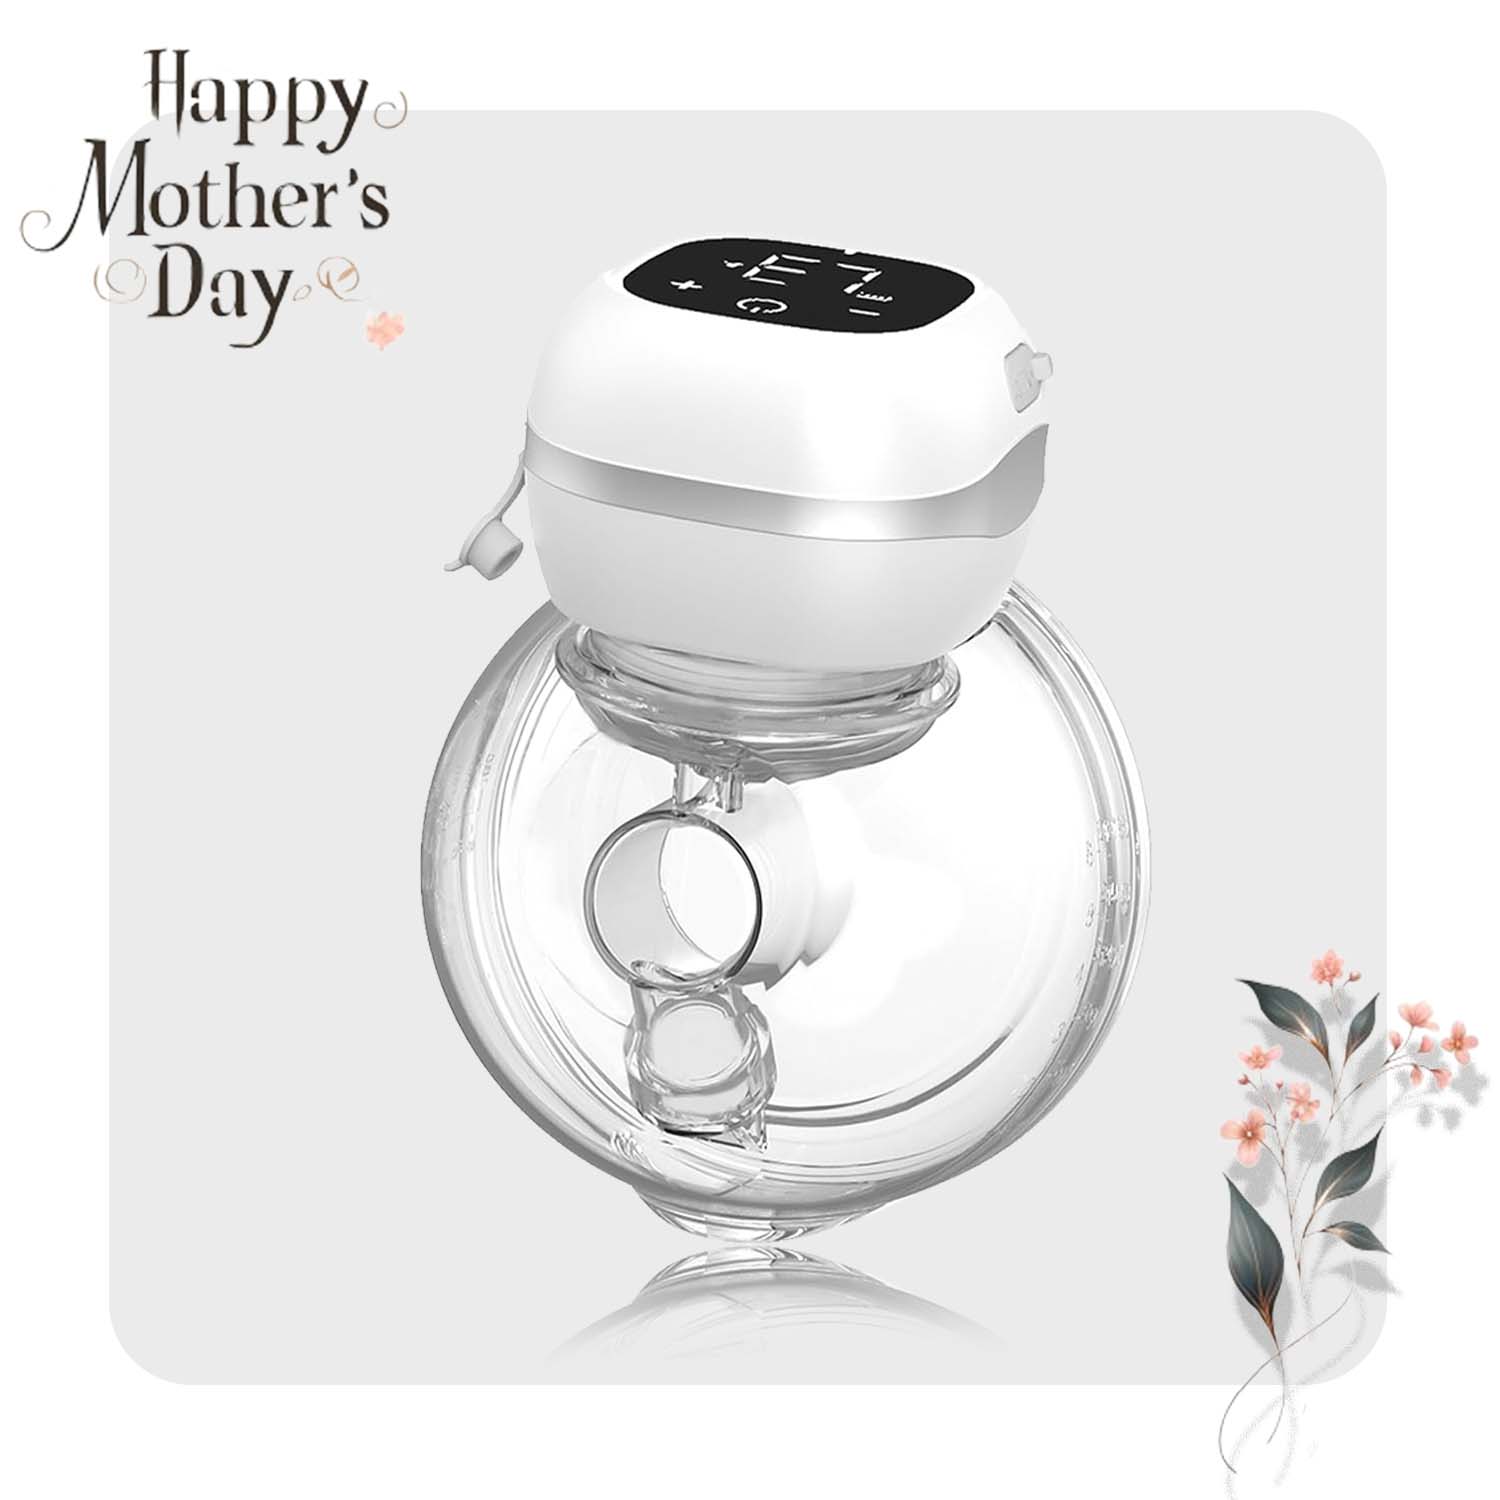 Mother's Day Gifts for expectant mothers, Mother's Day gifts for pregnant mothers, Mother's Day surprises -KISSBOBO Breast Pump 1306 Plus